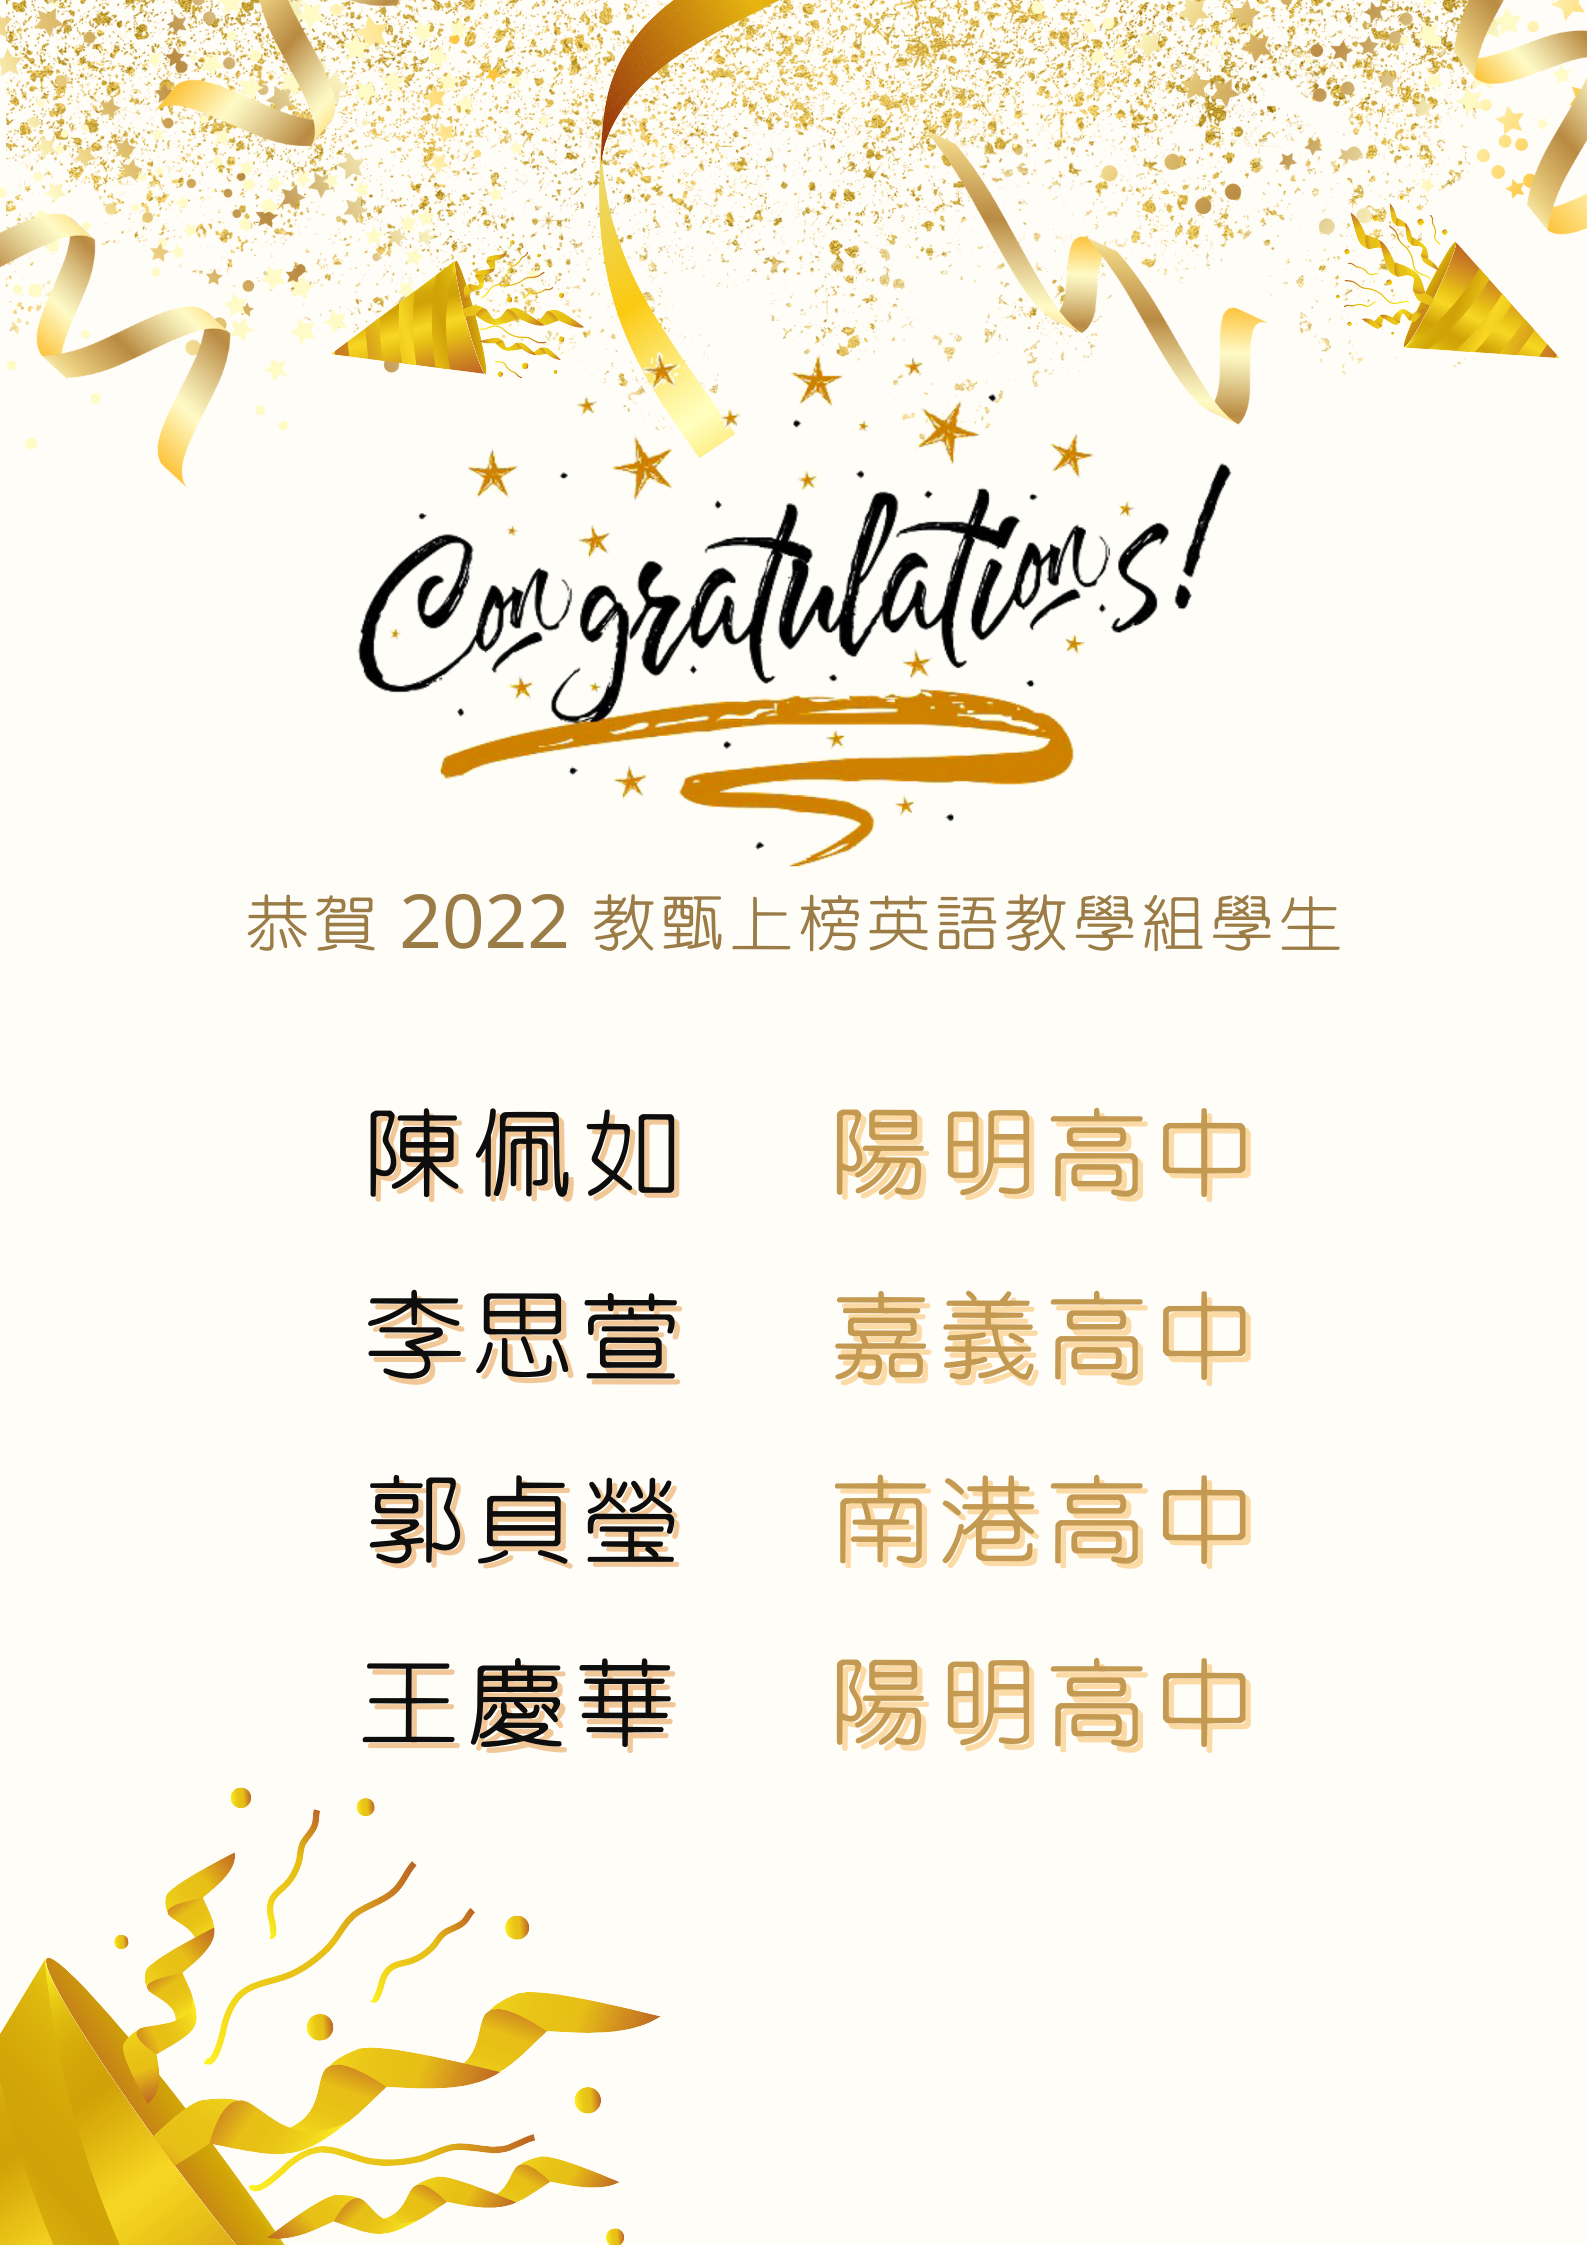 Congratulations! 4 MA-TESOL students passed the teaching screening and got the offer